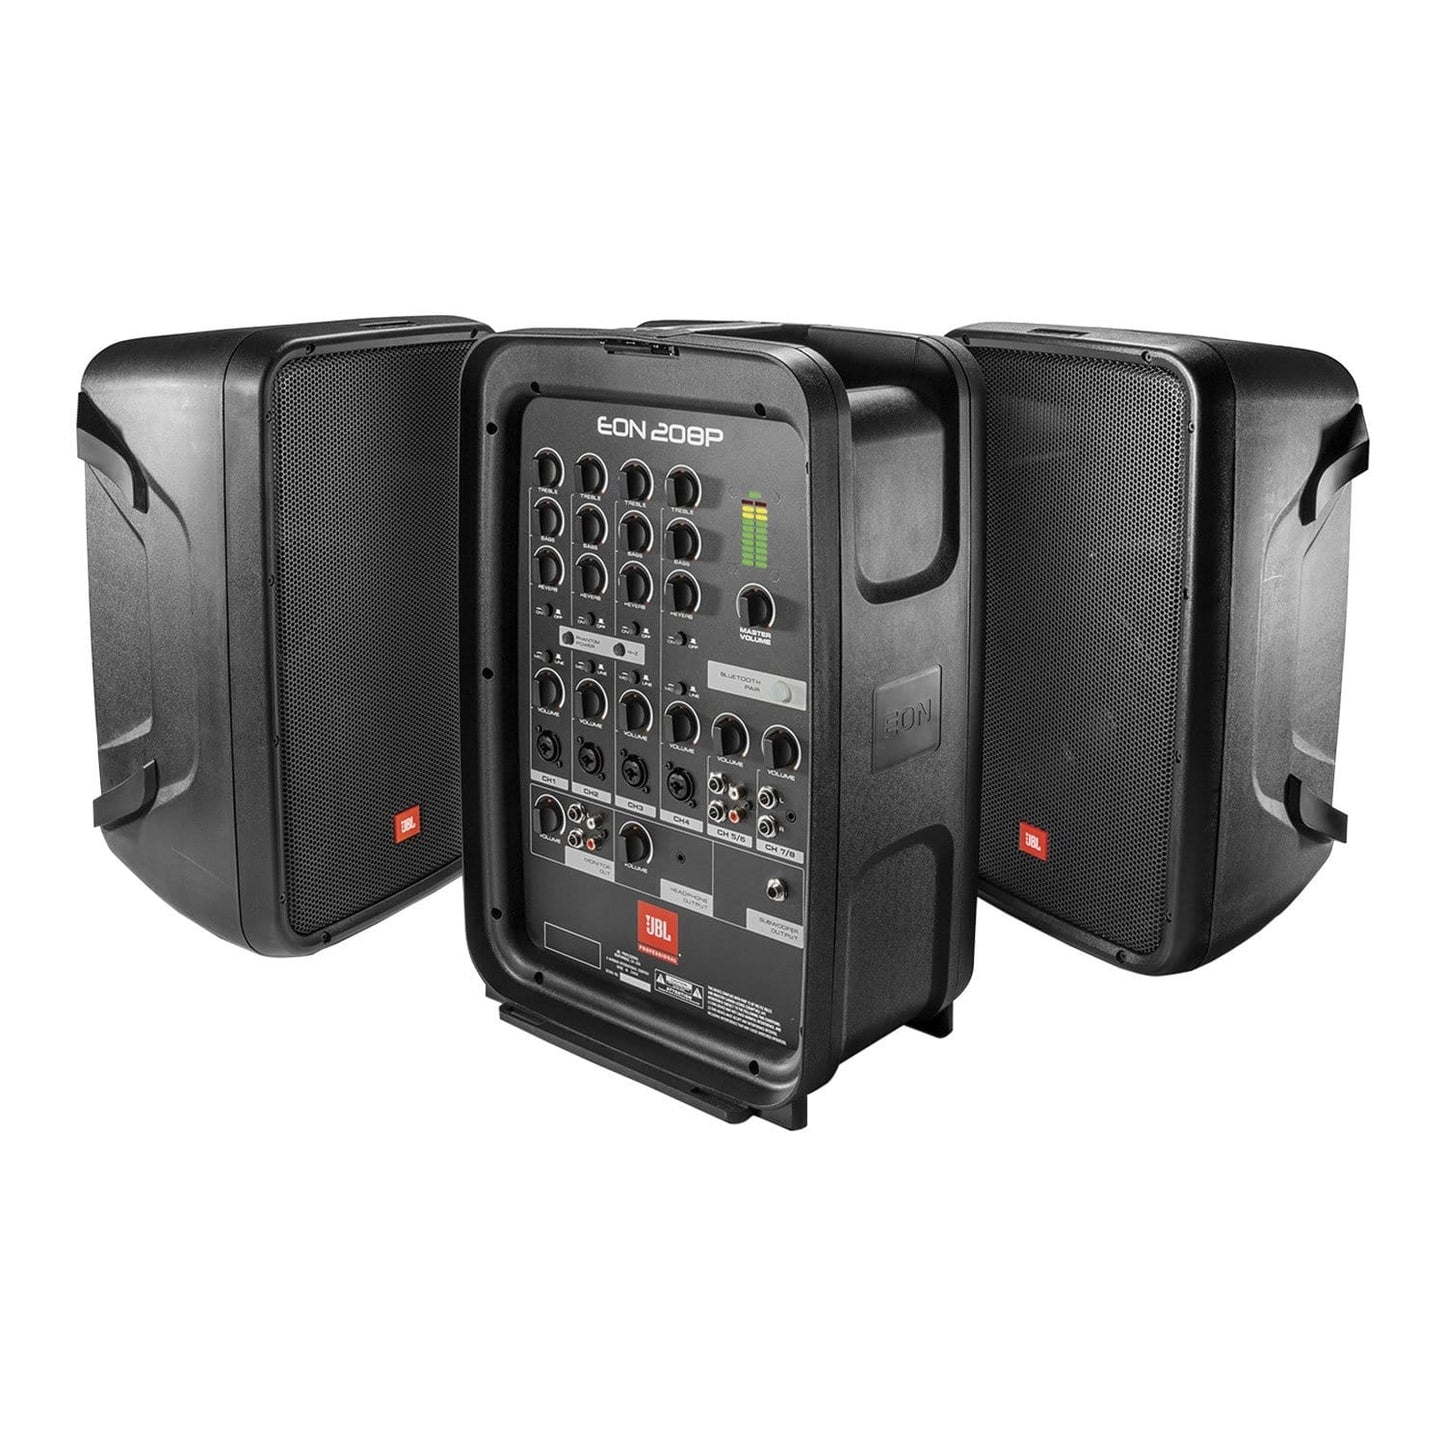 JBL EON208P Portable PA System with Shure BLX24 PG58 Mic System - ProSound and Stage Lighting